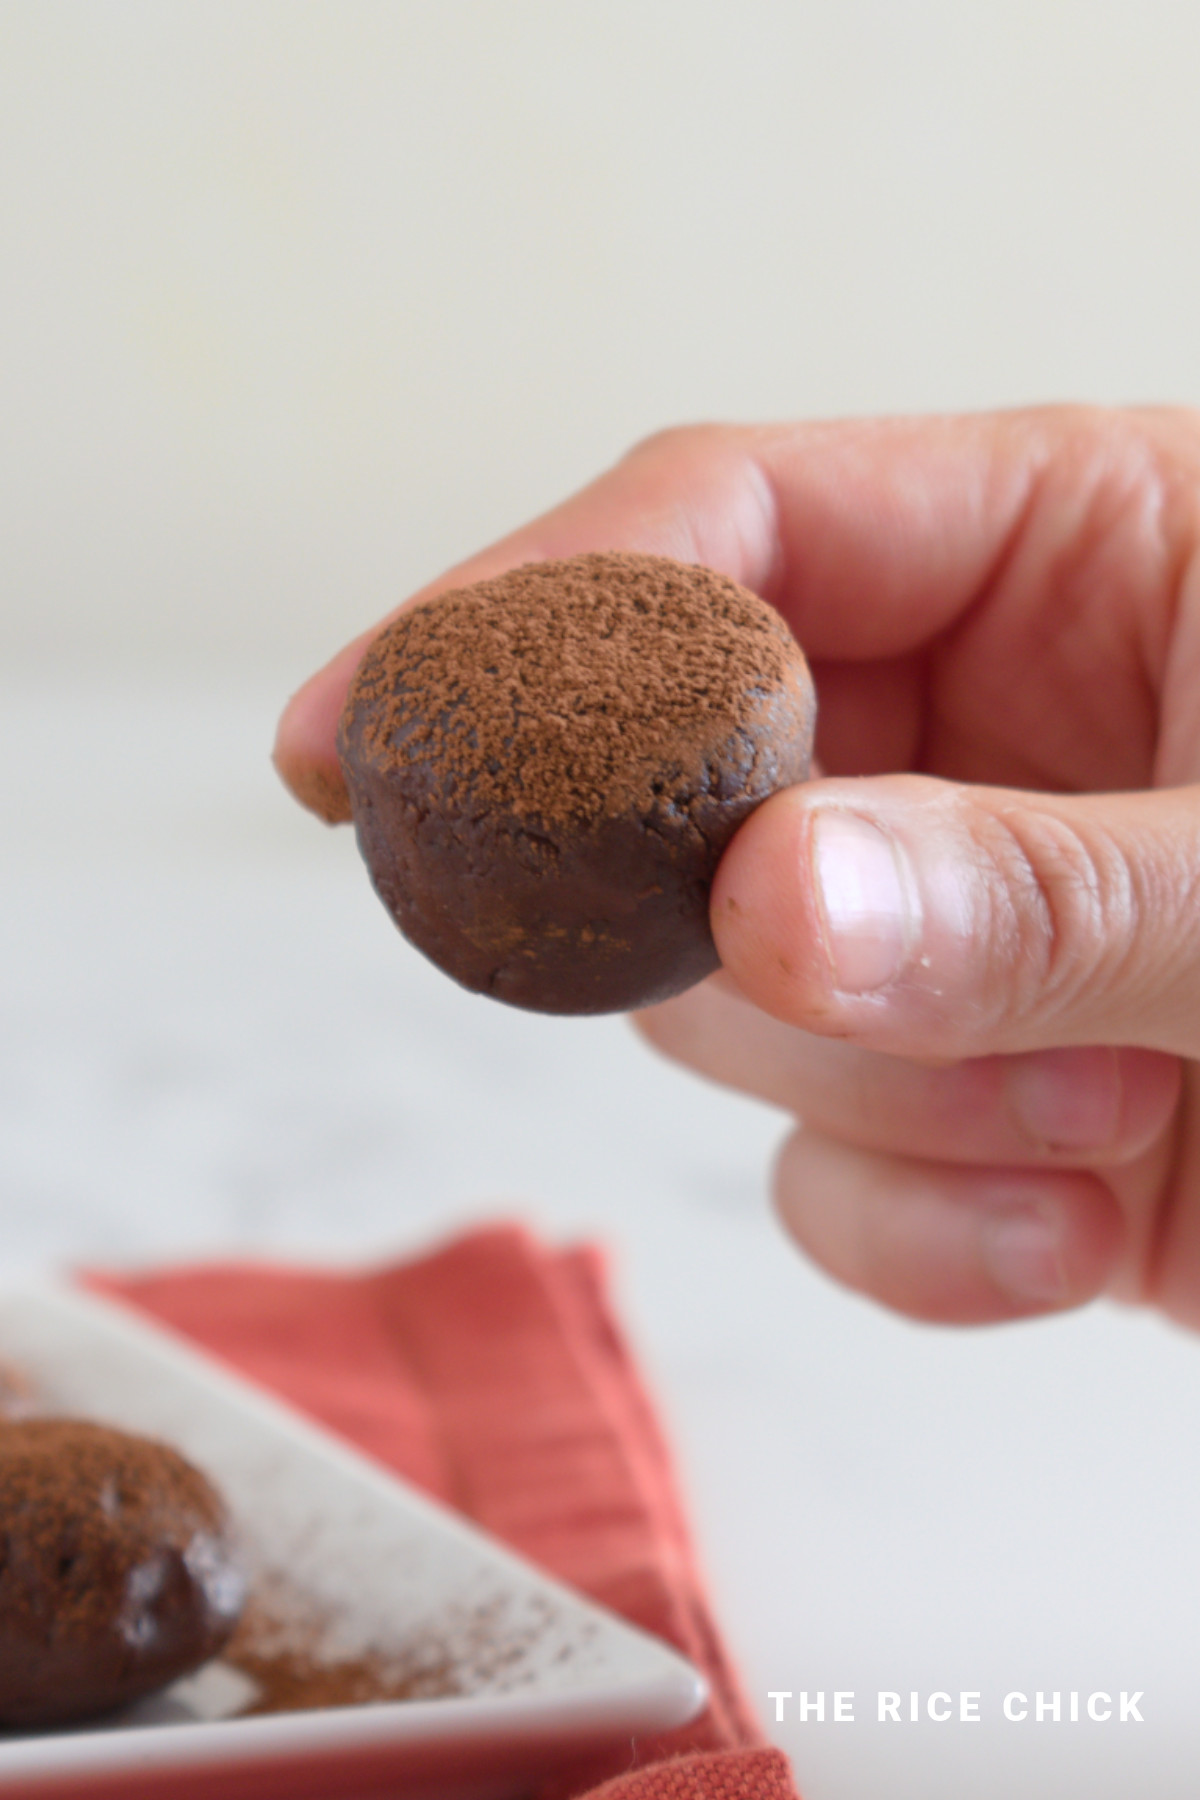 A piece of chocolate mochi being held in a hand.